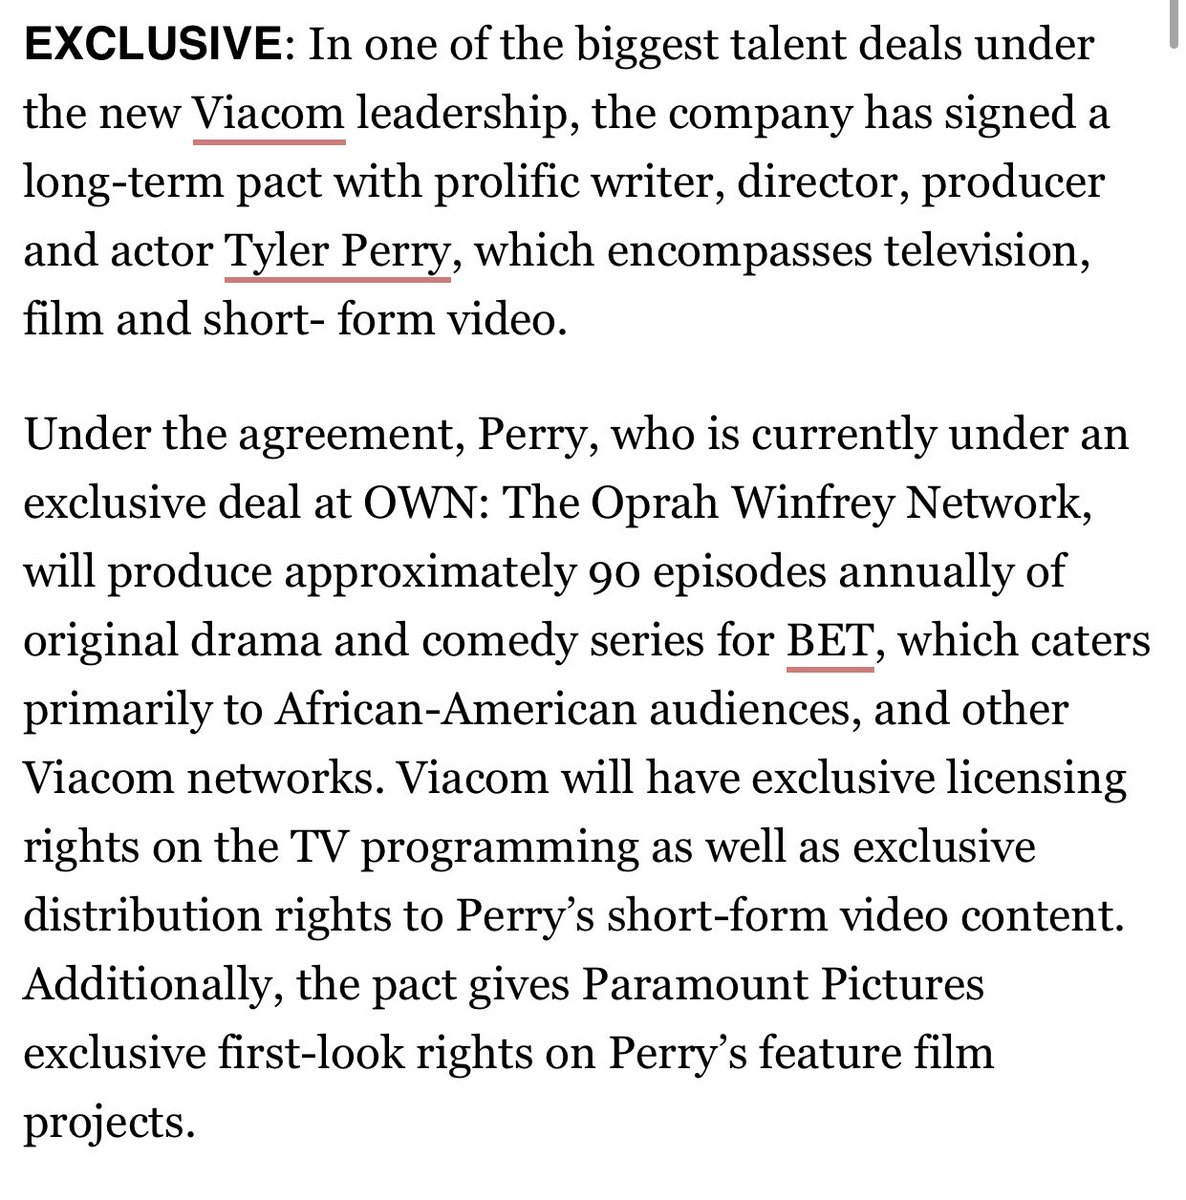 Tyler Perry/Tyler Perry Films has an exclusive film contract with Viacom/Paramount (since 2017) He **just** ended the exclusive TV contract he had with Oprah’s OWN and his new TV work will be licensed by Viacom w/ additional distribution rights.  https://deadline.com/2017/07/tyler-perry-viacom-film-tv-deal-with-viacom-1202128622/